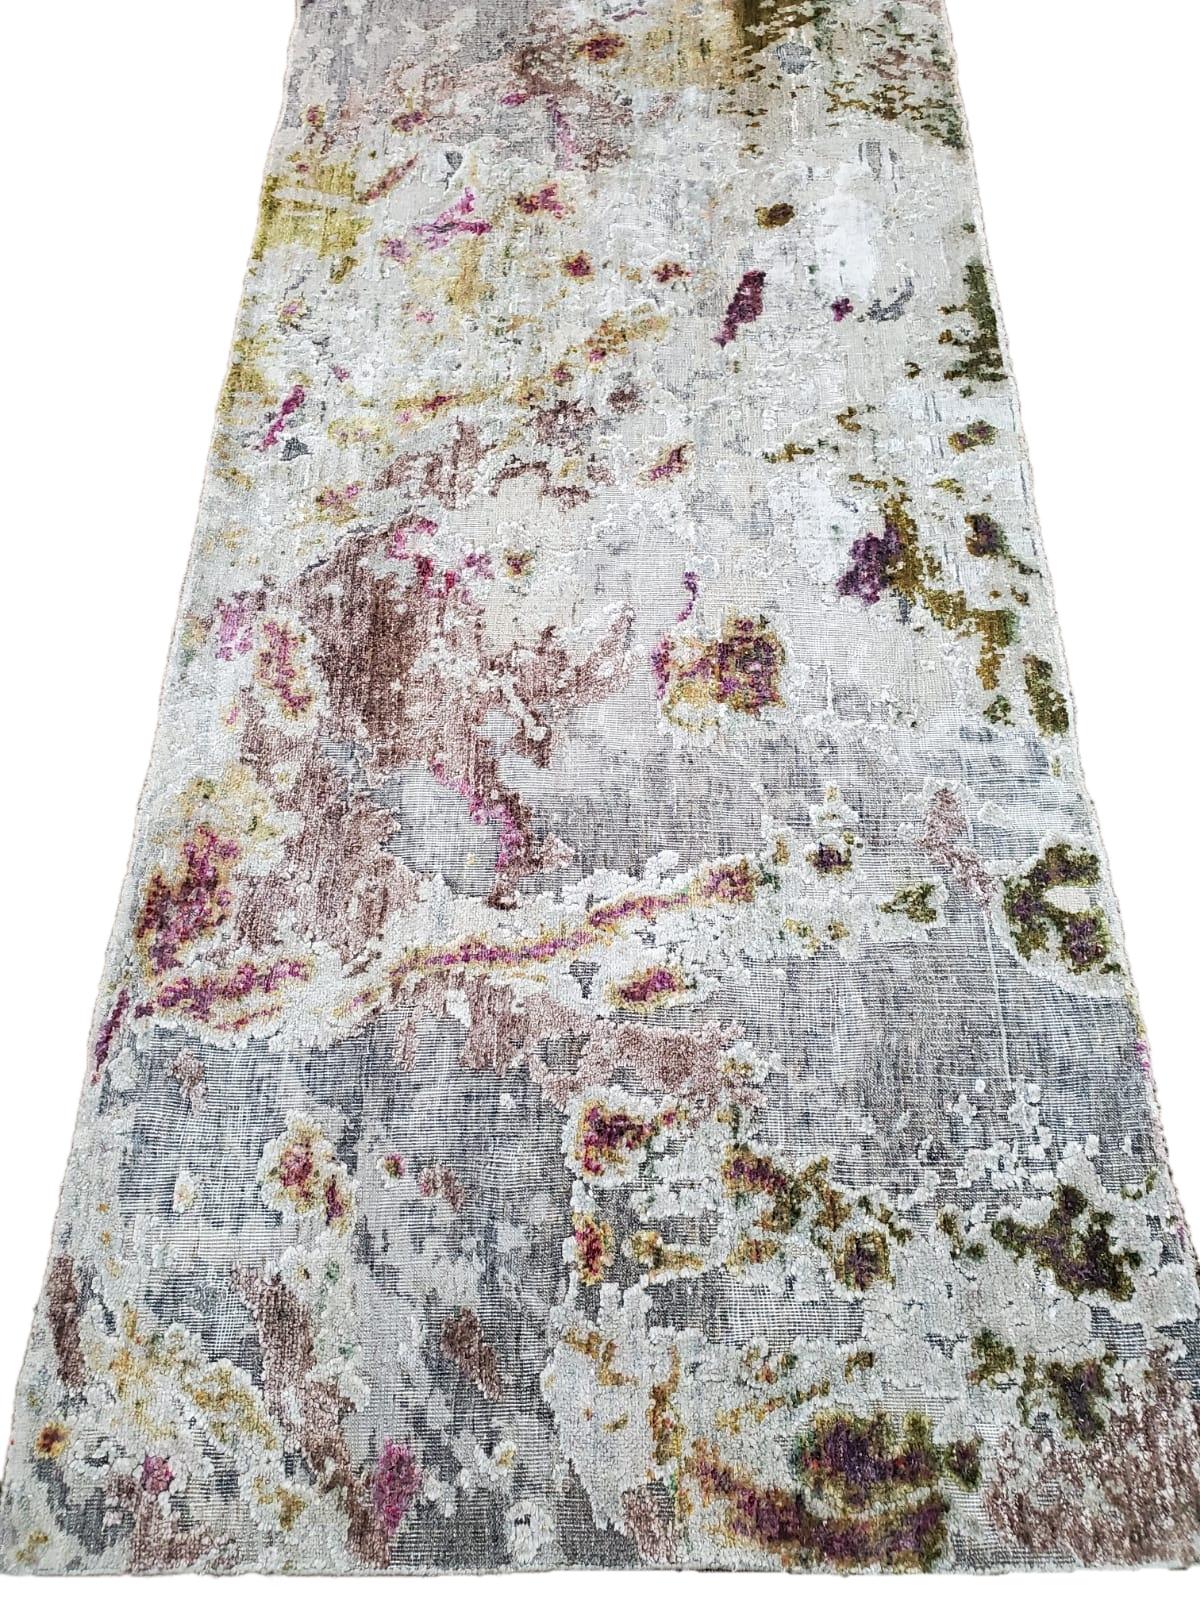 Organic Modern Eco-Friendly Distressed Wool and Silk Abstract Contemporary Runner Rug in Stock For Sale